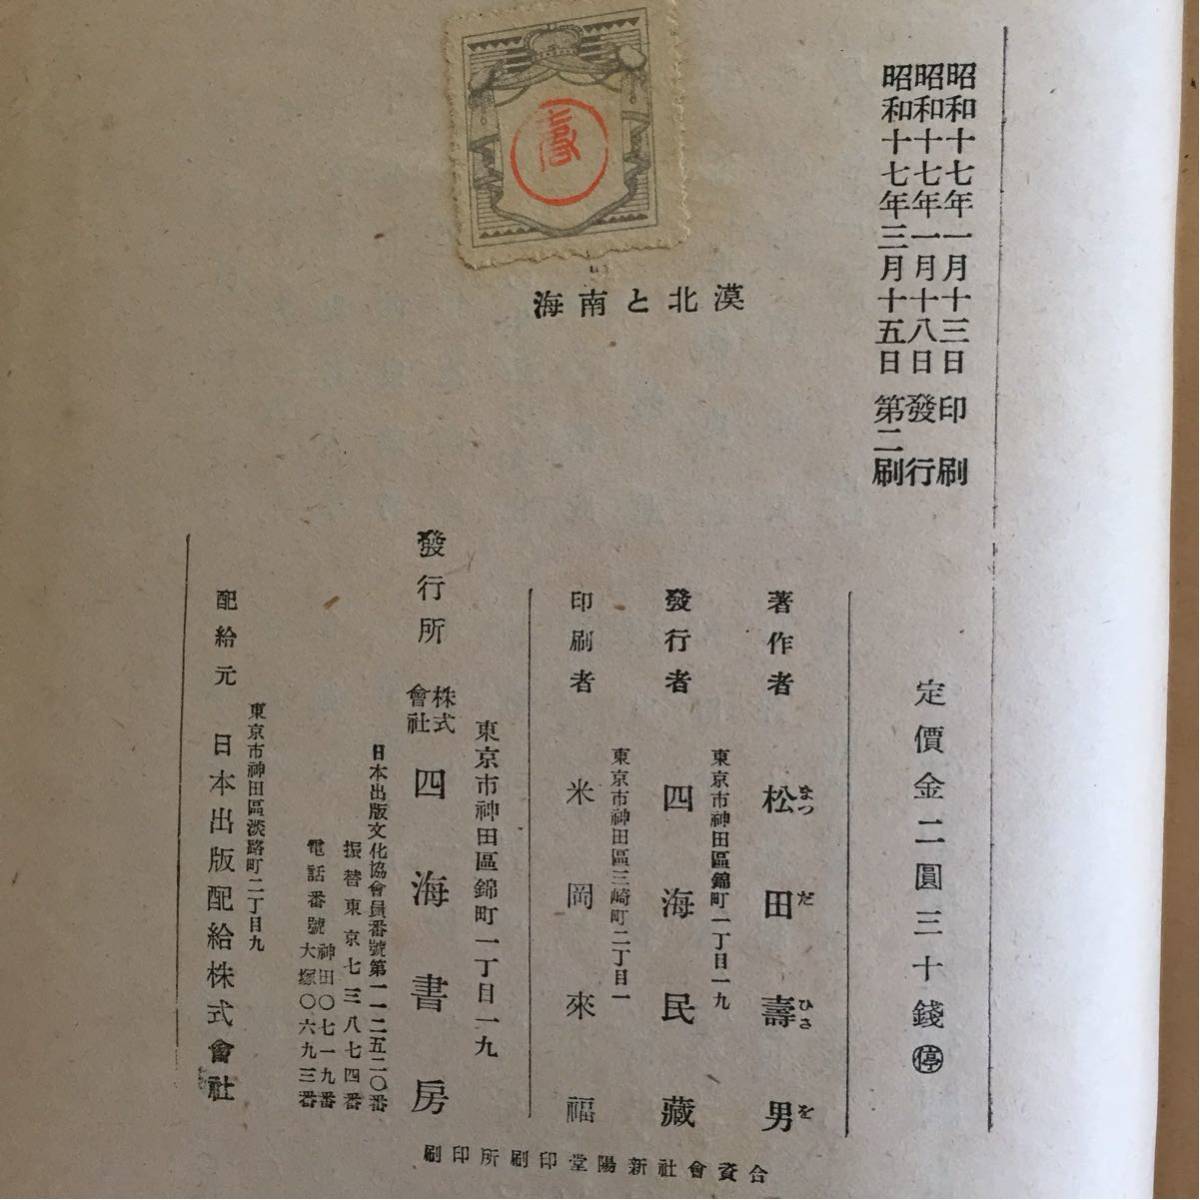 . north . southern sea - Asia history regarding ... sea . pine rice field . man Tokyo four sea bookstore Showa era 17 year the first version 3 month no. 2. issue .book